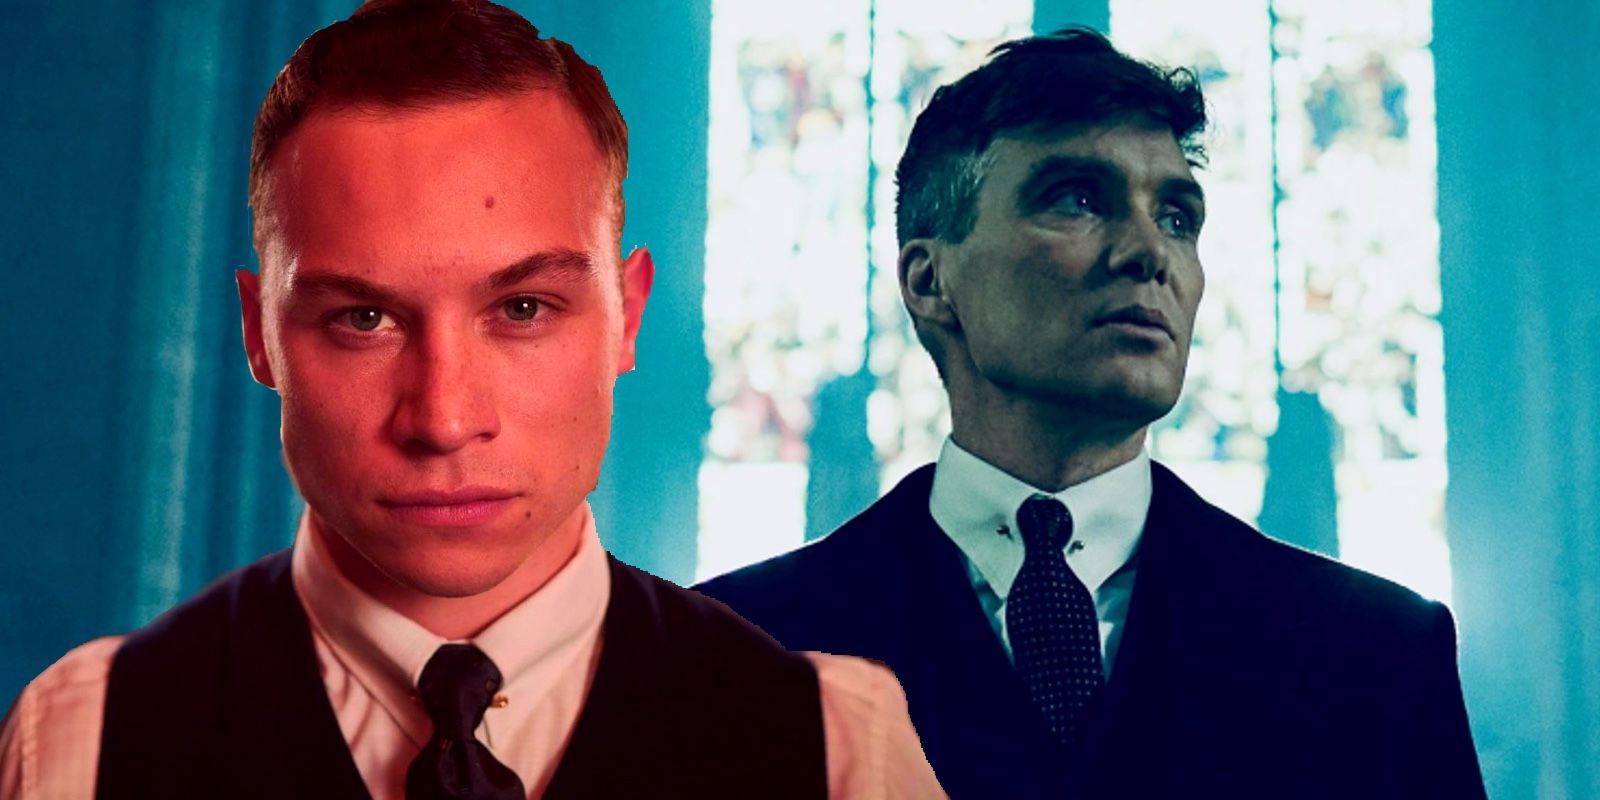 Michael Gray and Tommy Shelby